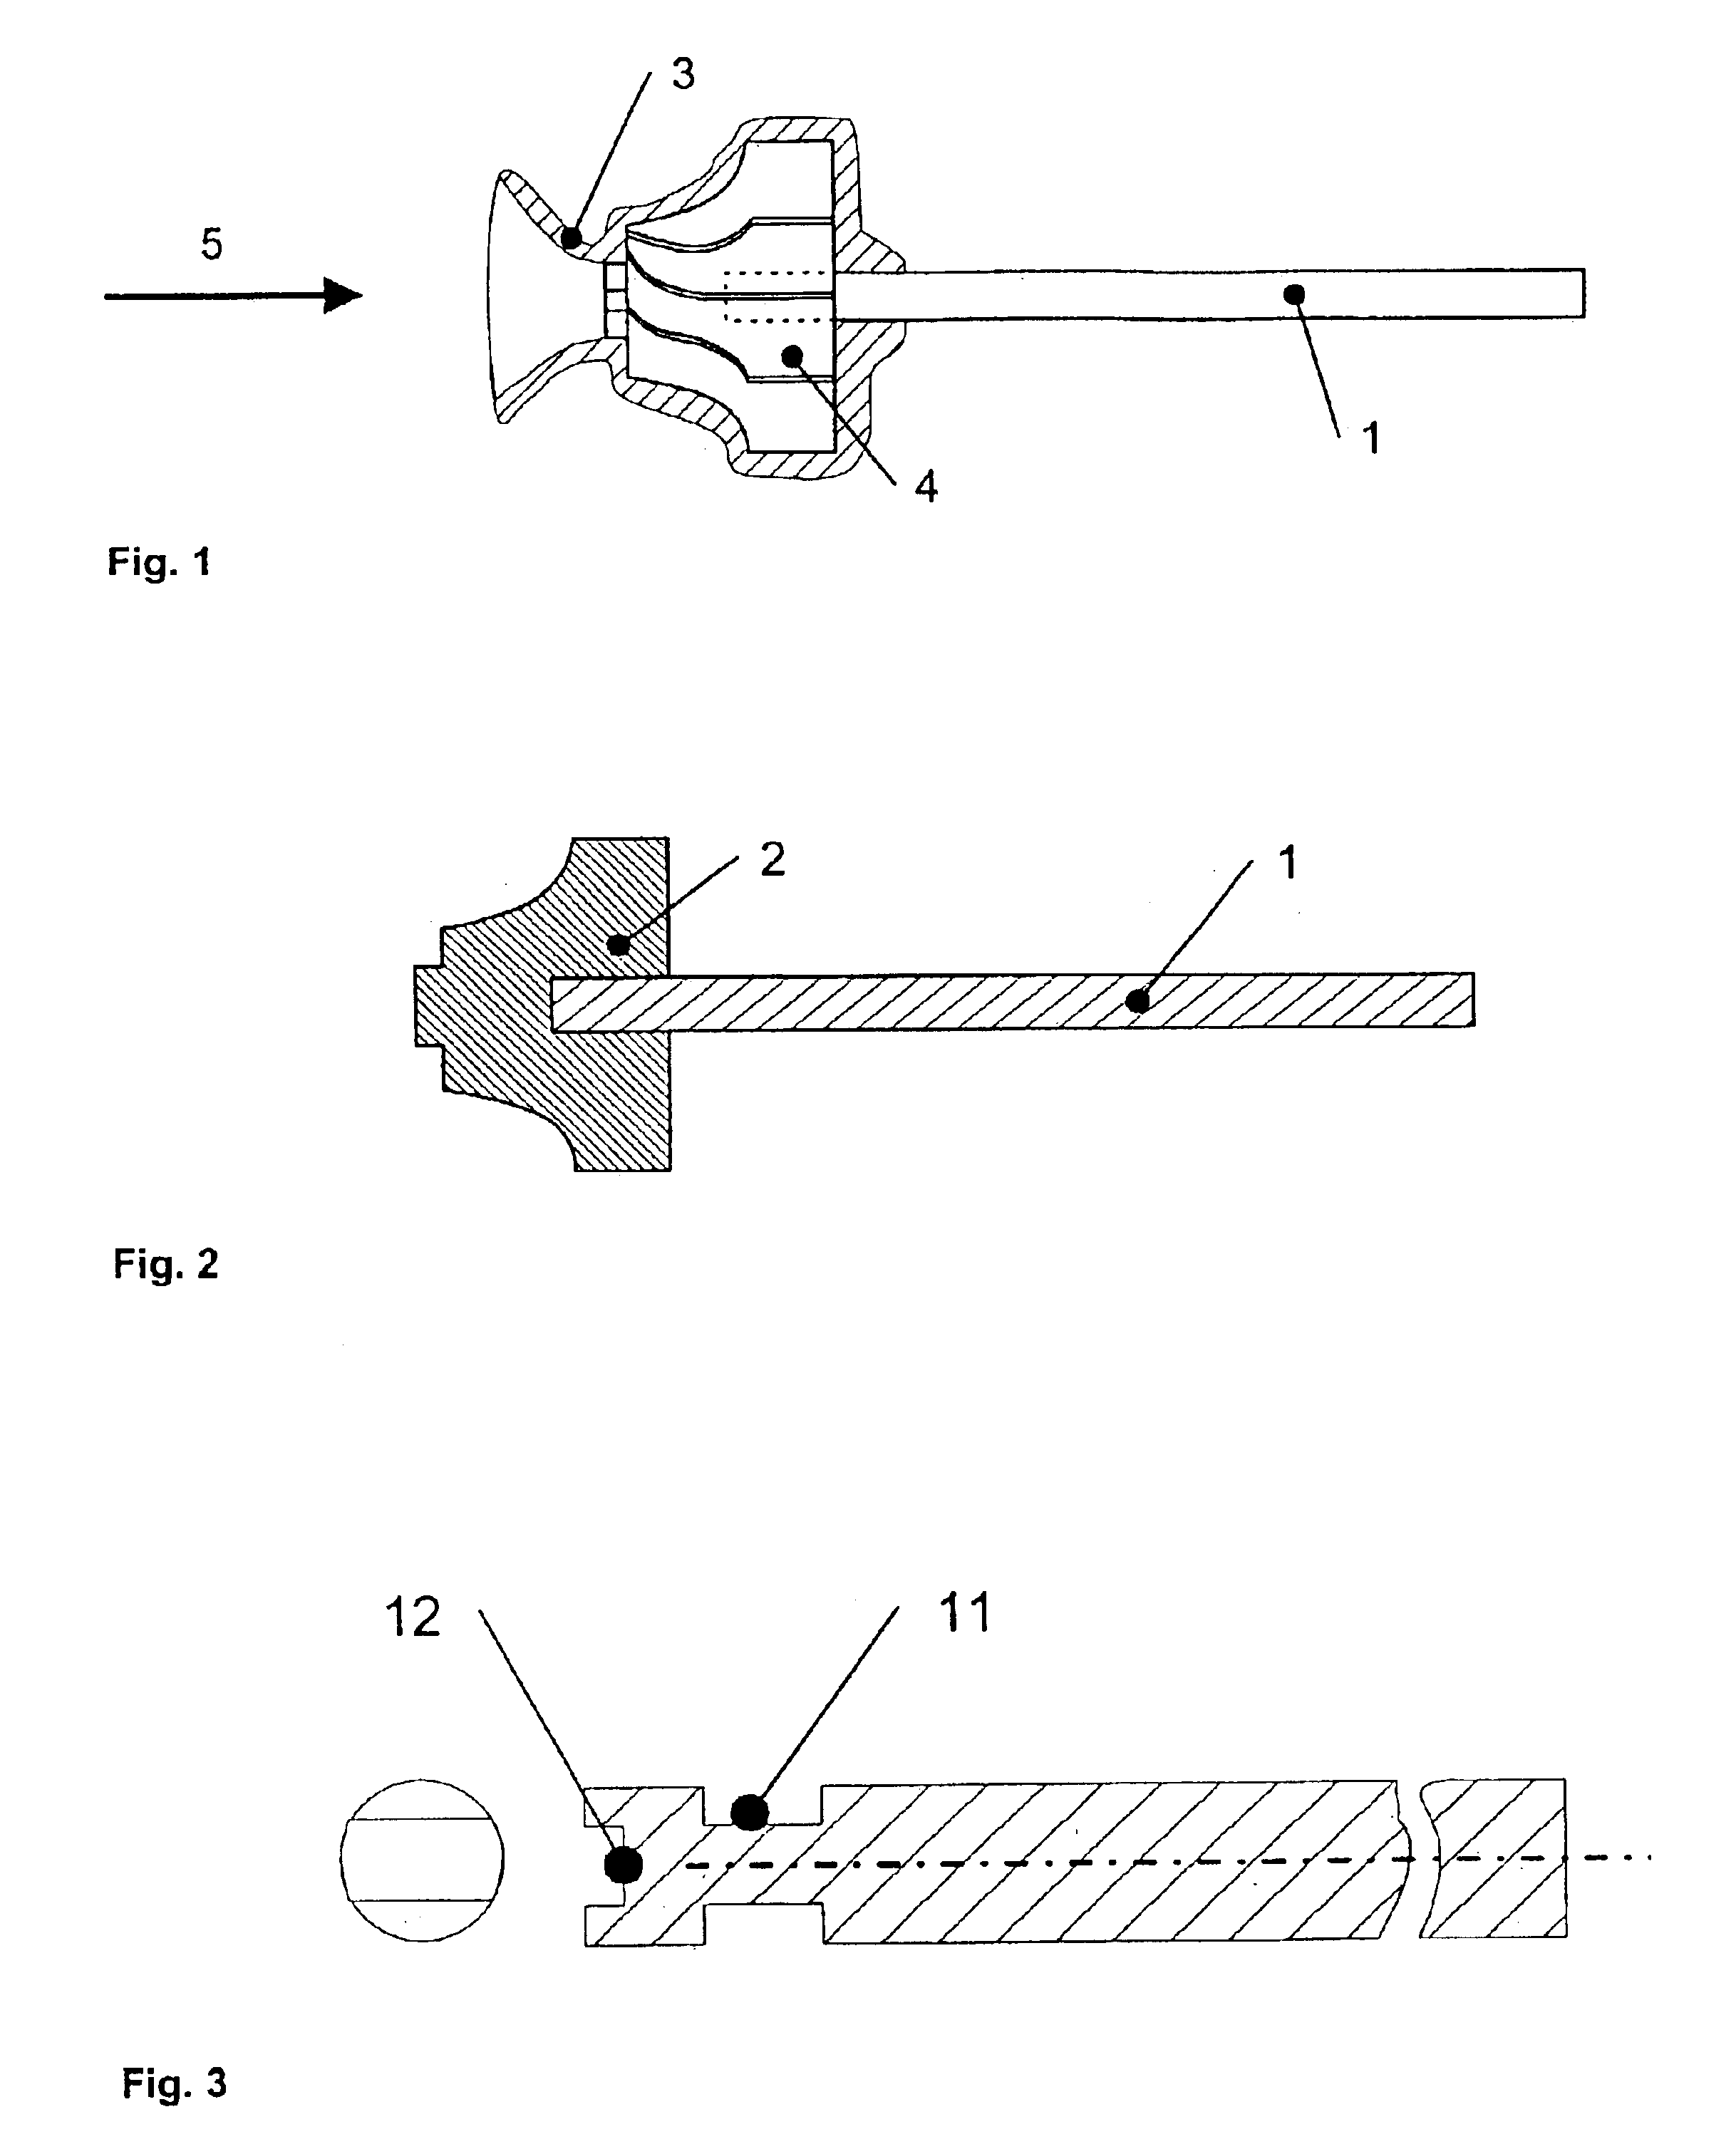 Method for manufacturing a turbine wheel rotor